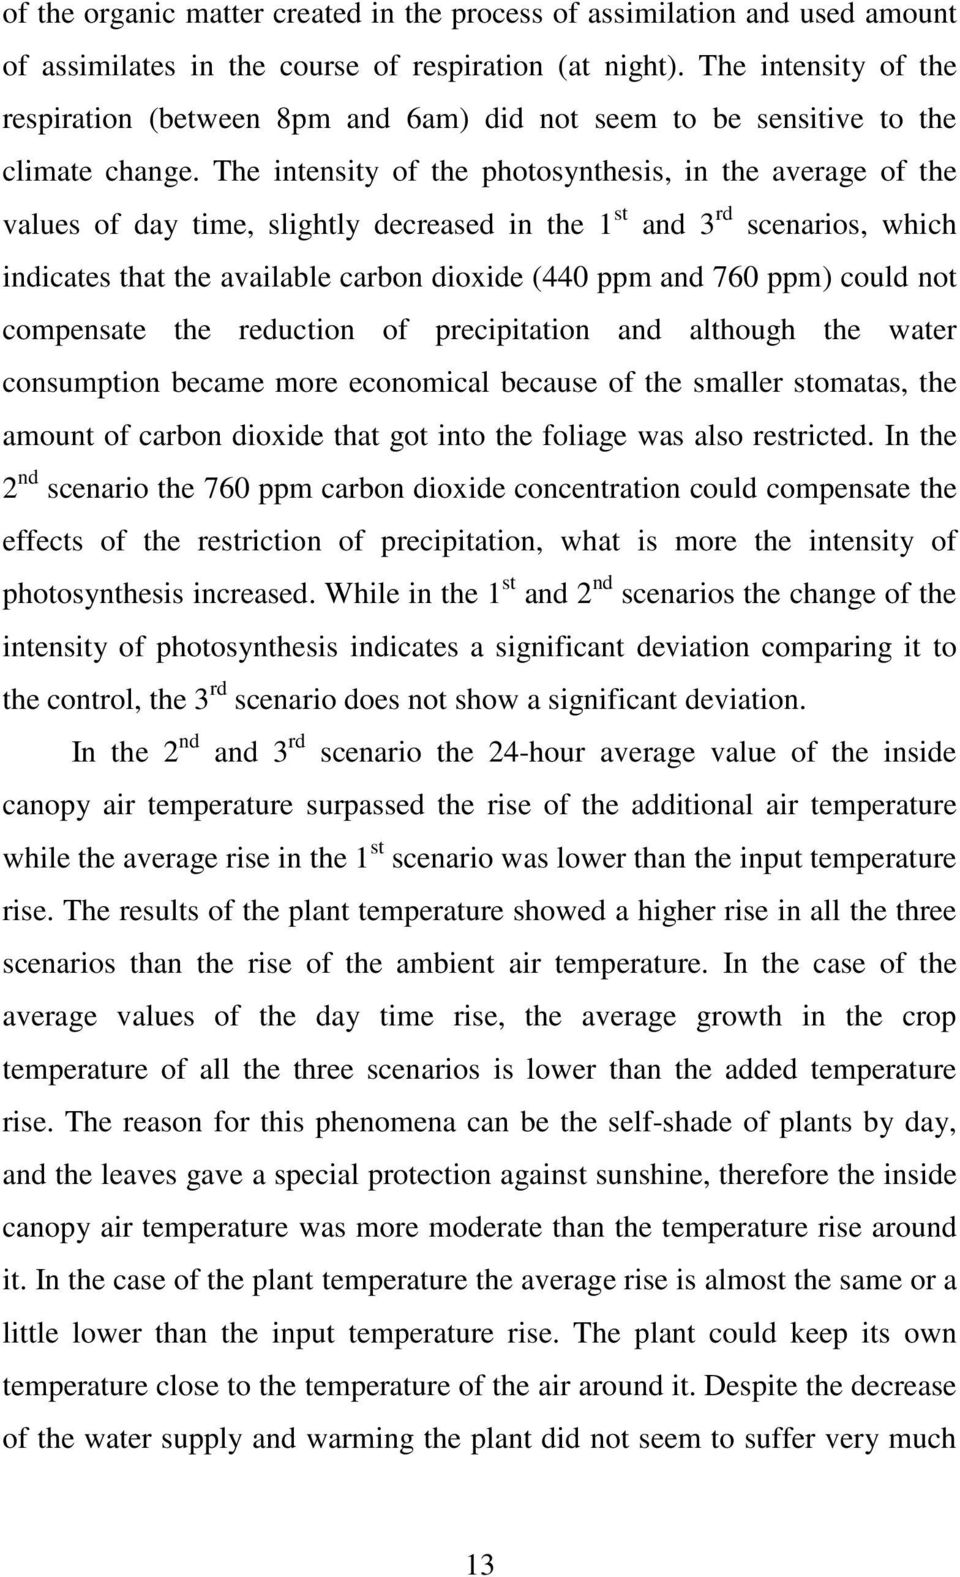 The intensity of the photosynthesis, in the average of the values of day time, slightly decreased in the 1 st and 3 rd scenarios, which indicates that the available carbon dioxide (440 ppm and 760